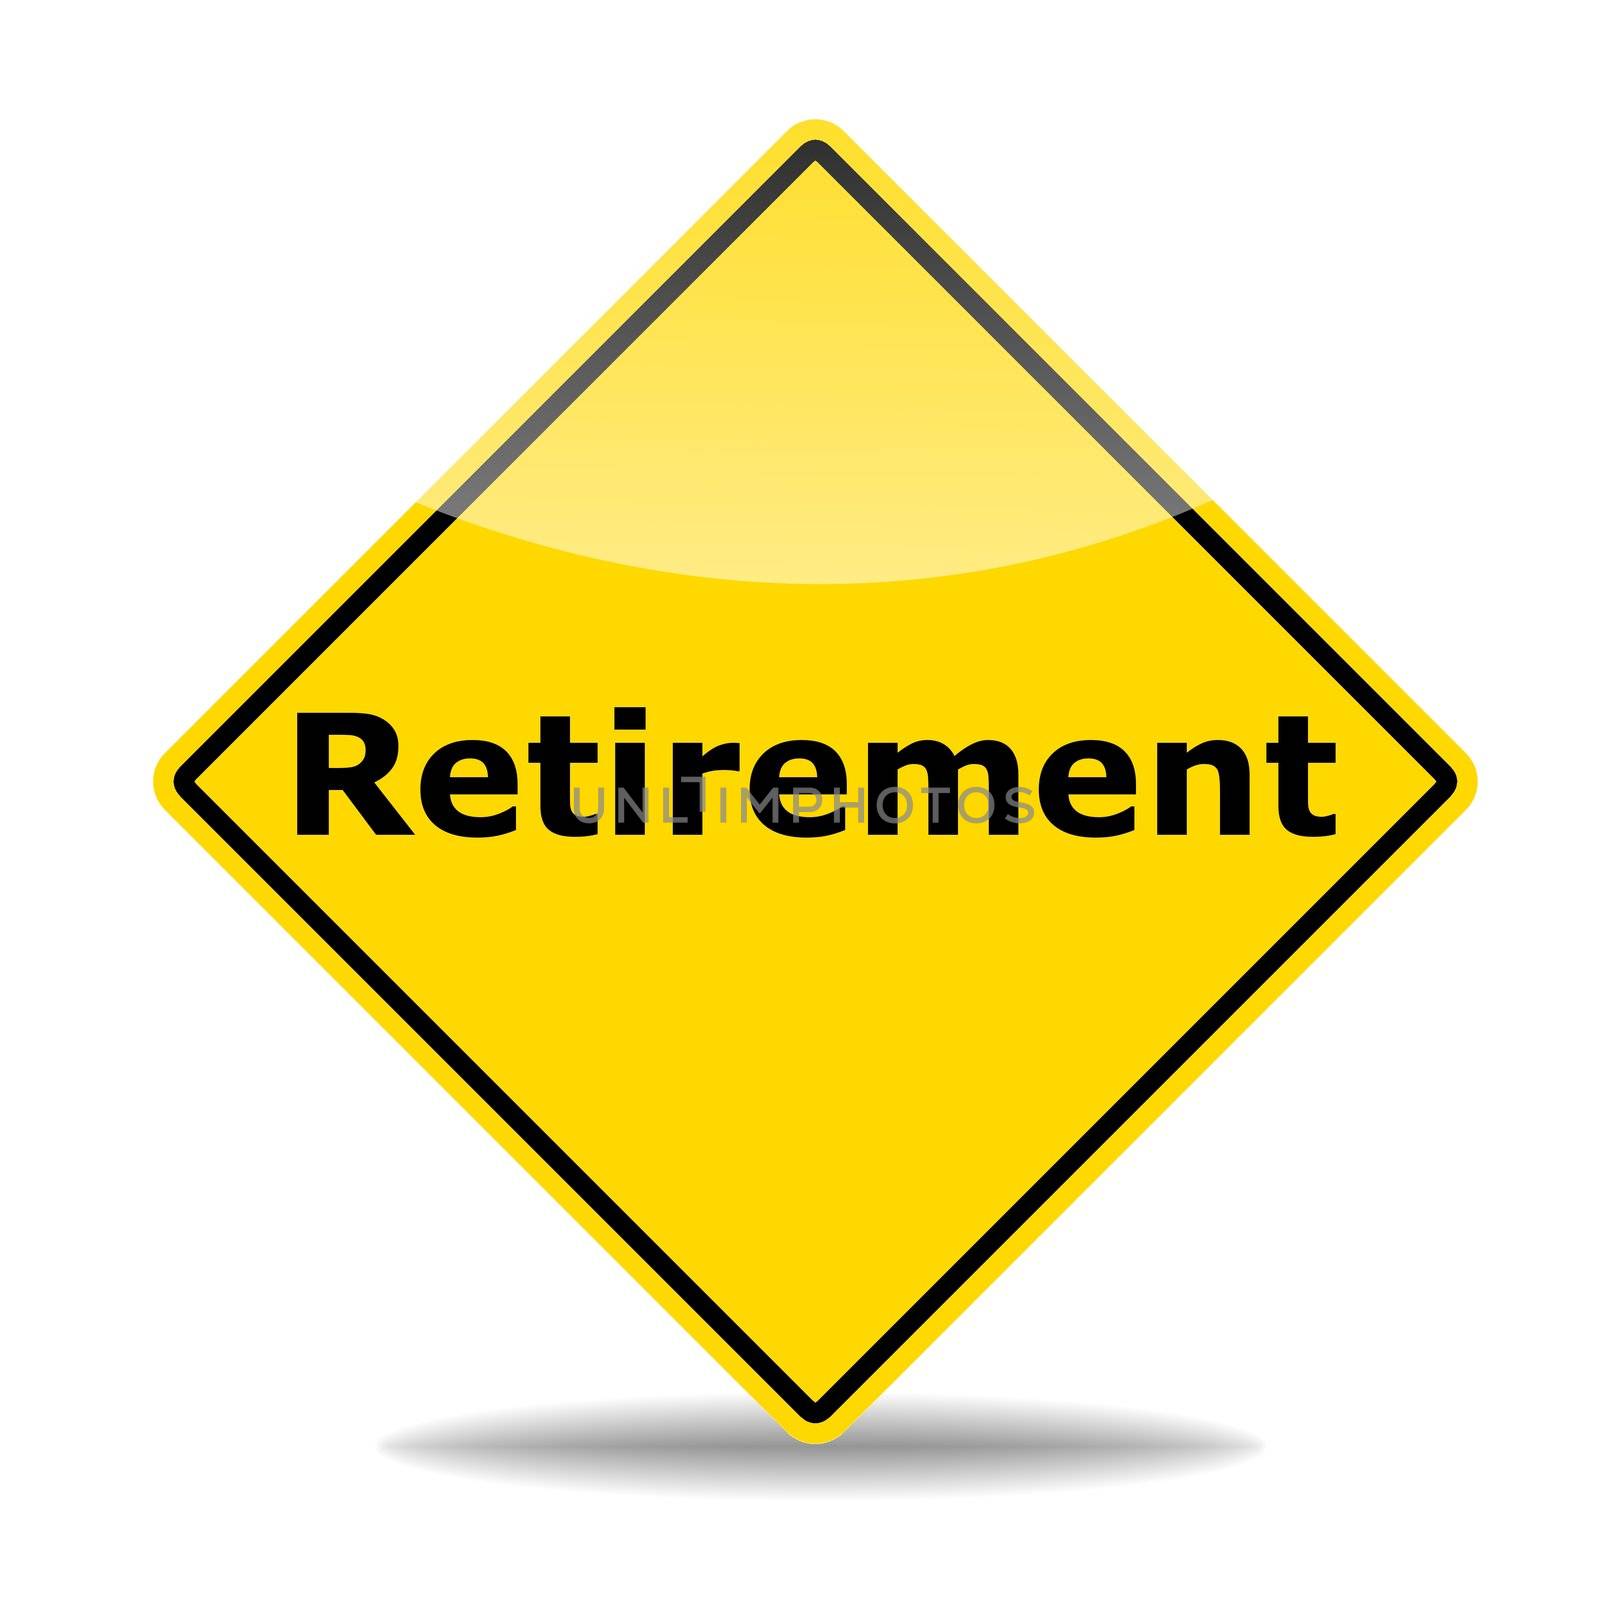 retirement concept with road sign isolated on white background